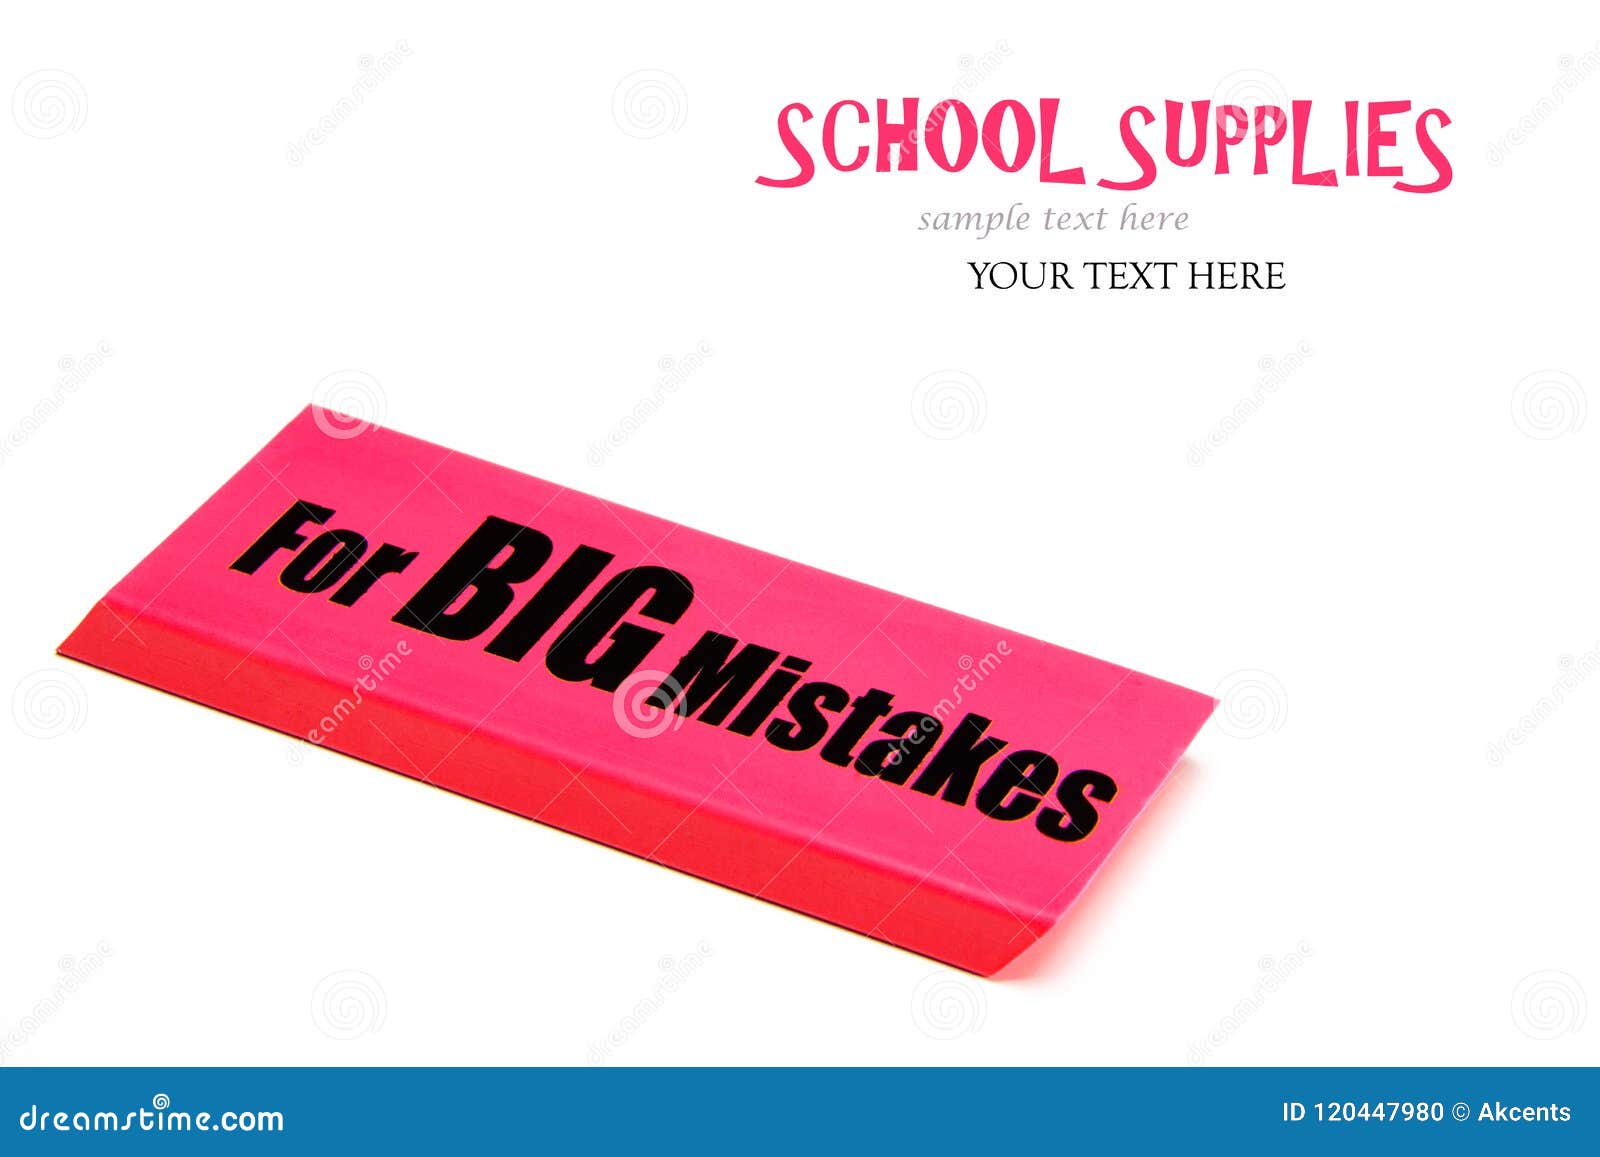 a large red eraser with message for big mistakes. school supplies.